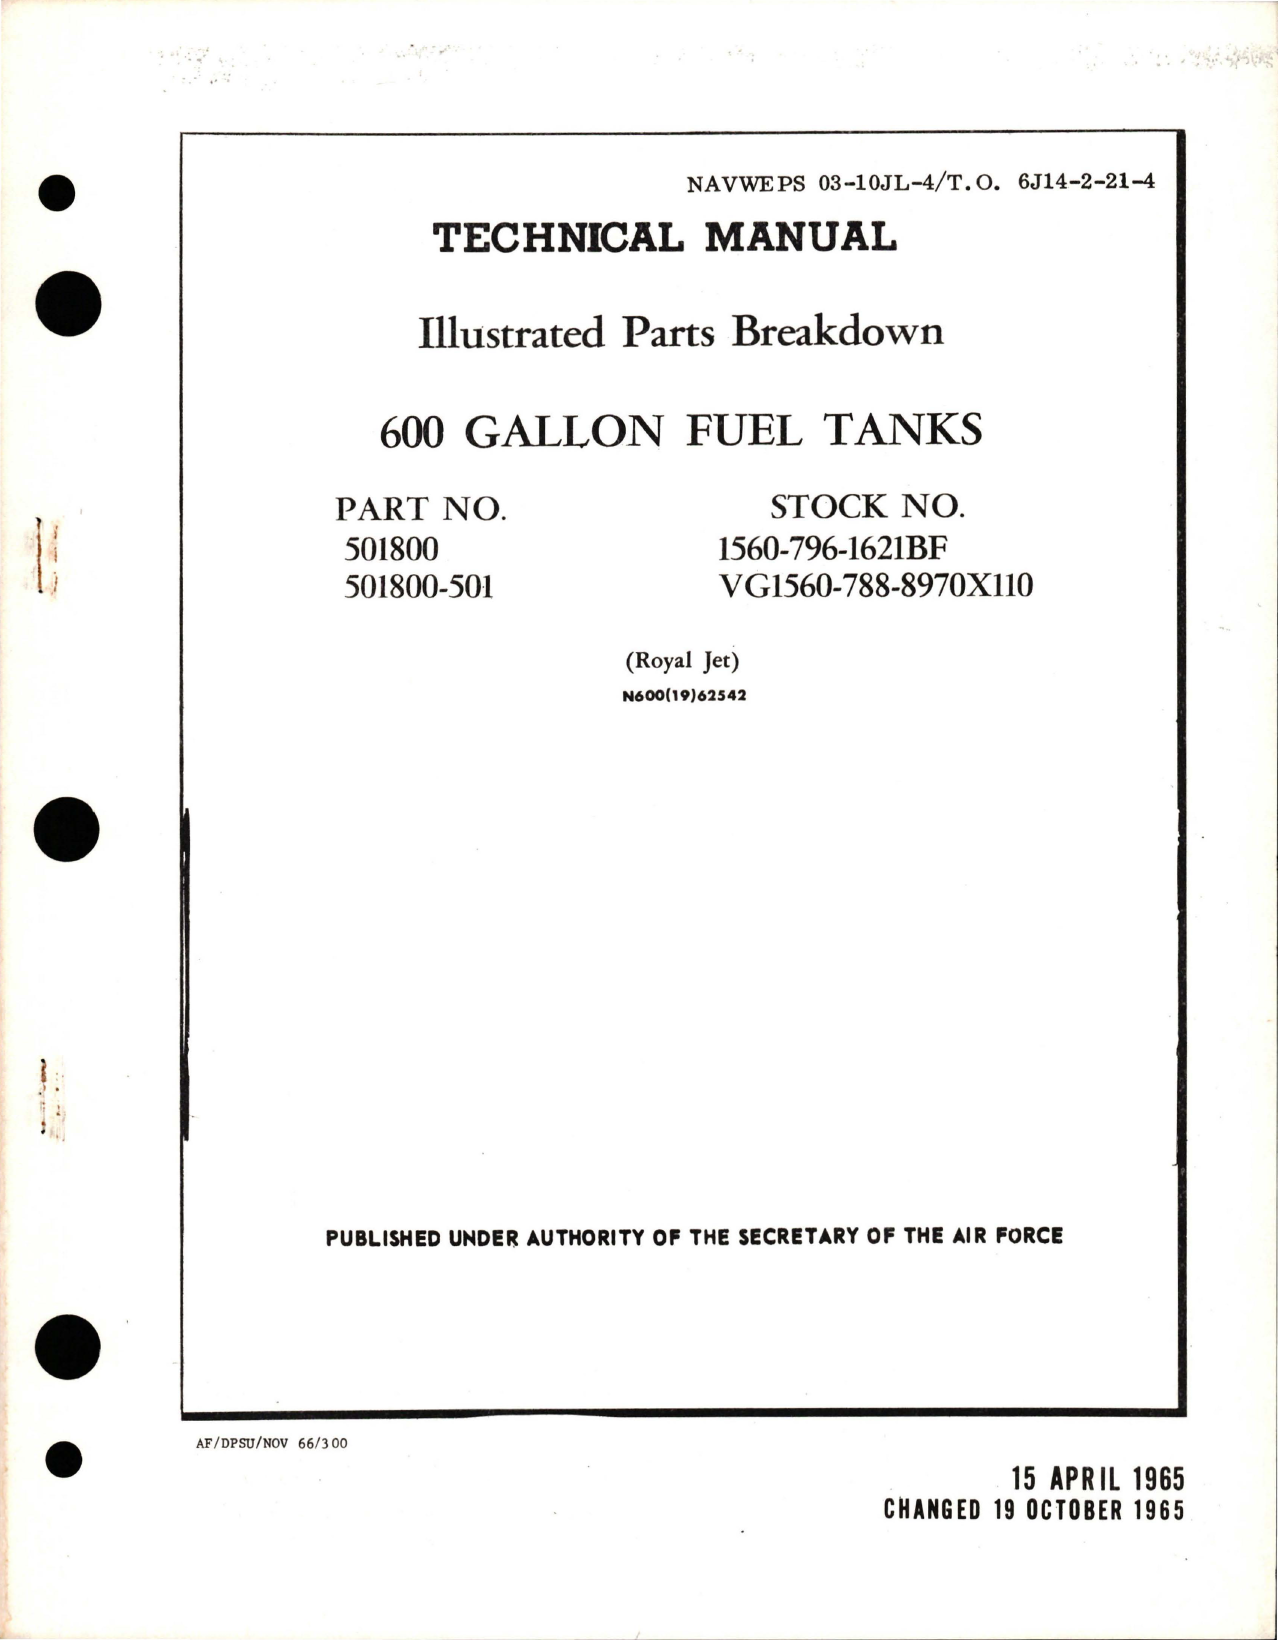 Sample page 1 from AirCorps Library document: Illustrated Parts Breakdown for 60 Gallon Fuel Tanks - Parts 501800 and 501800-501